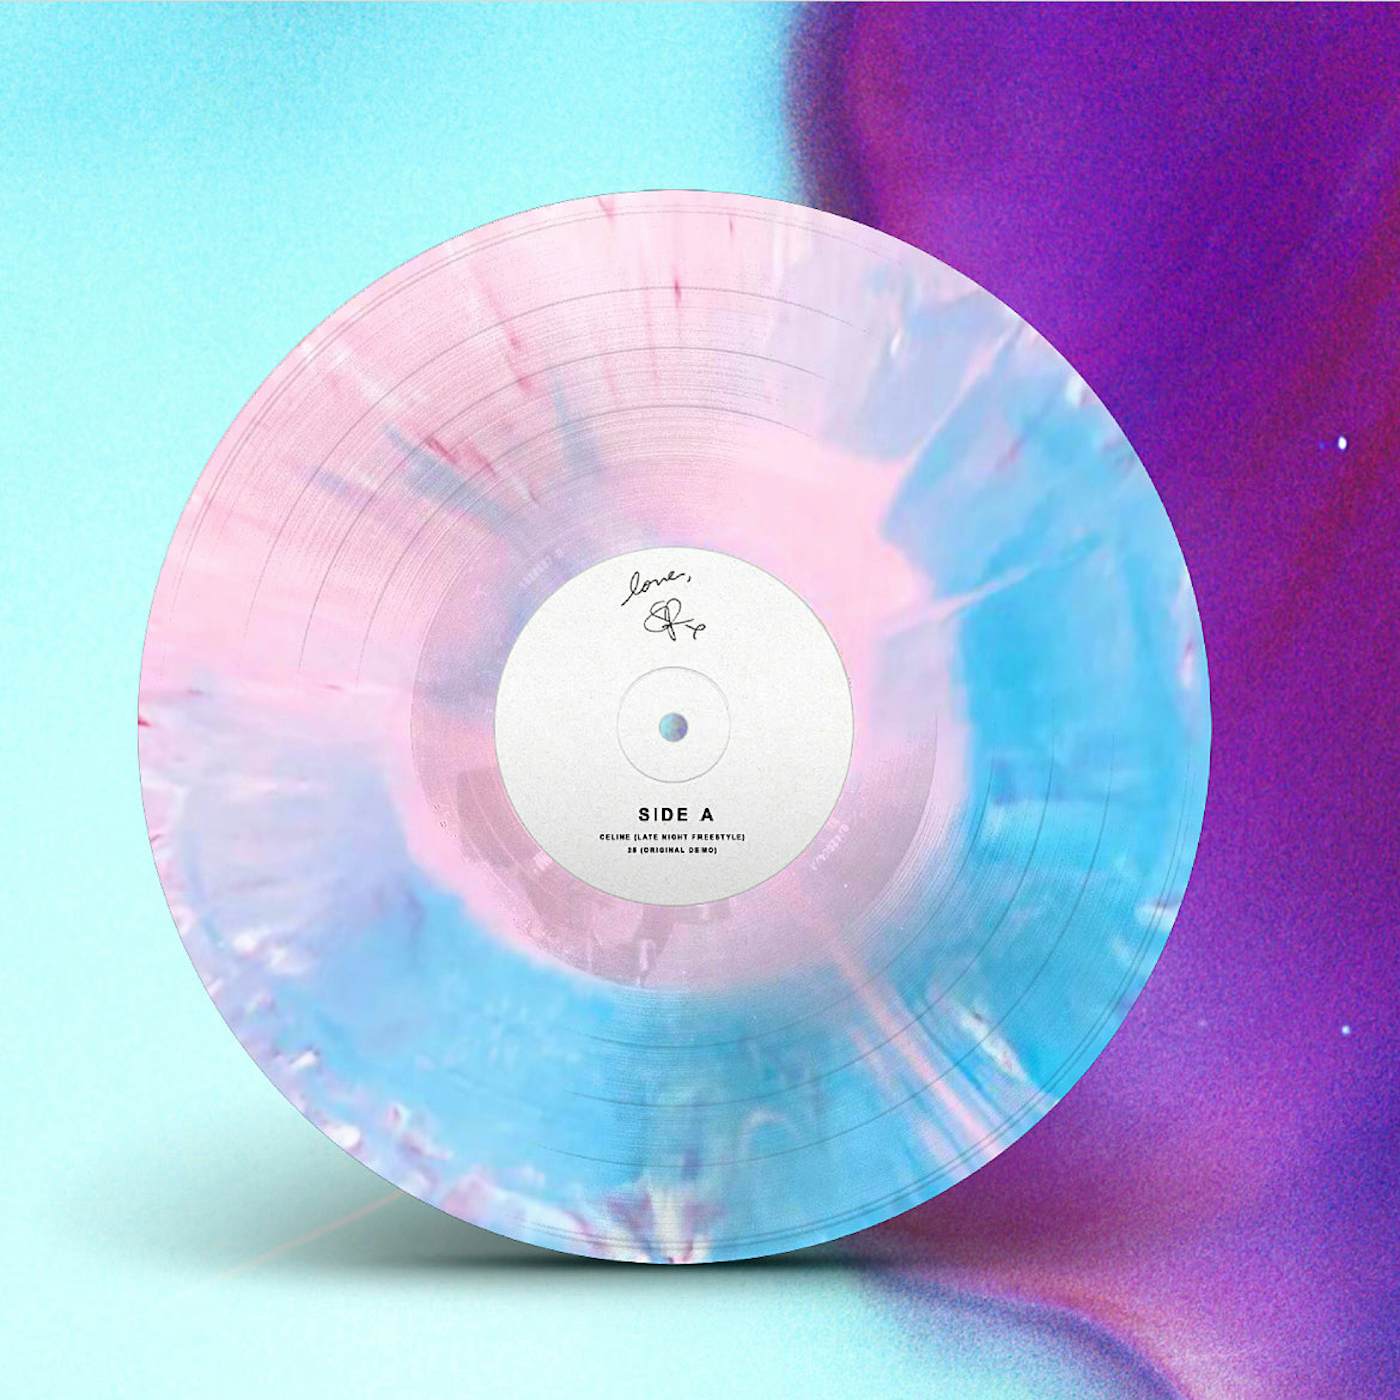 Sizzy Rocket From the Archives - 7" Cotton Candy Vinyl